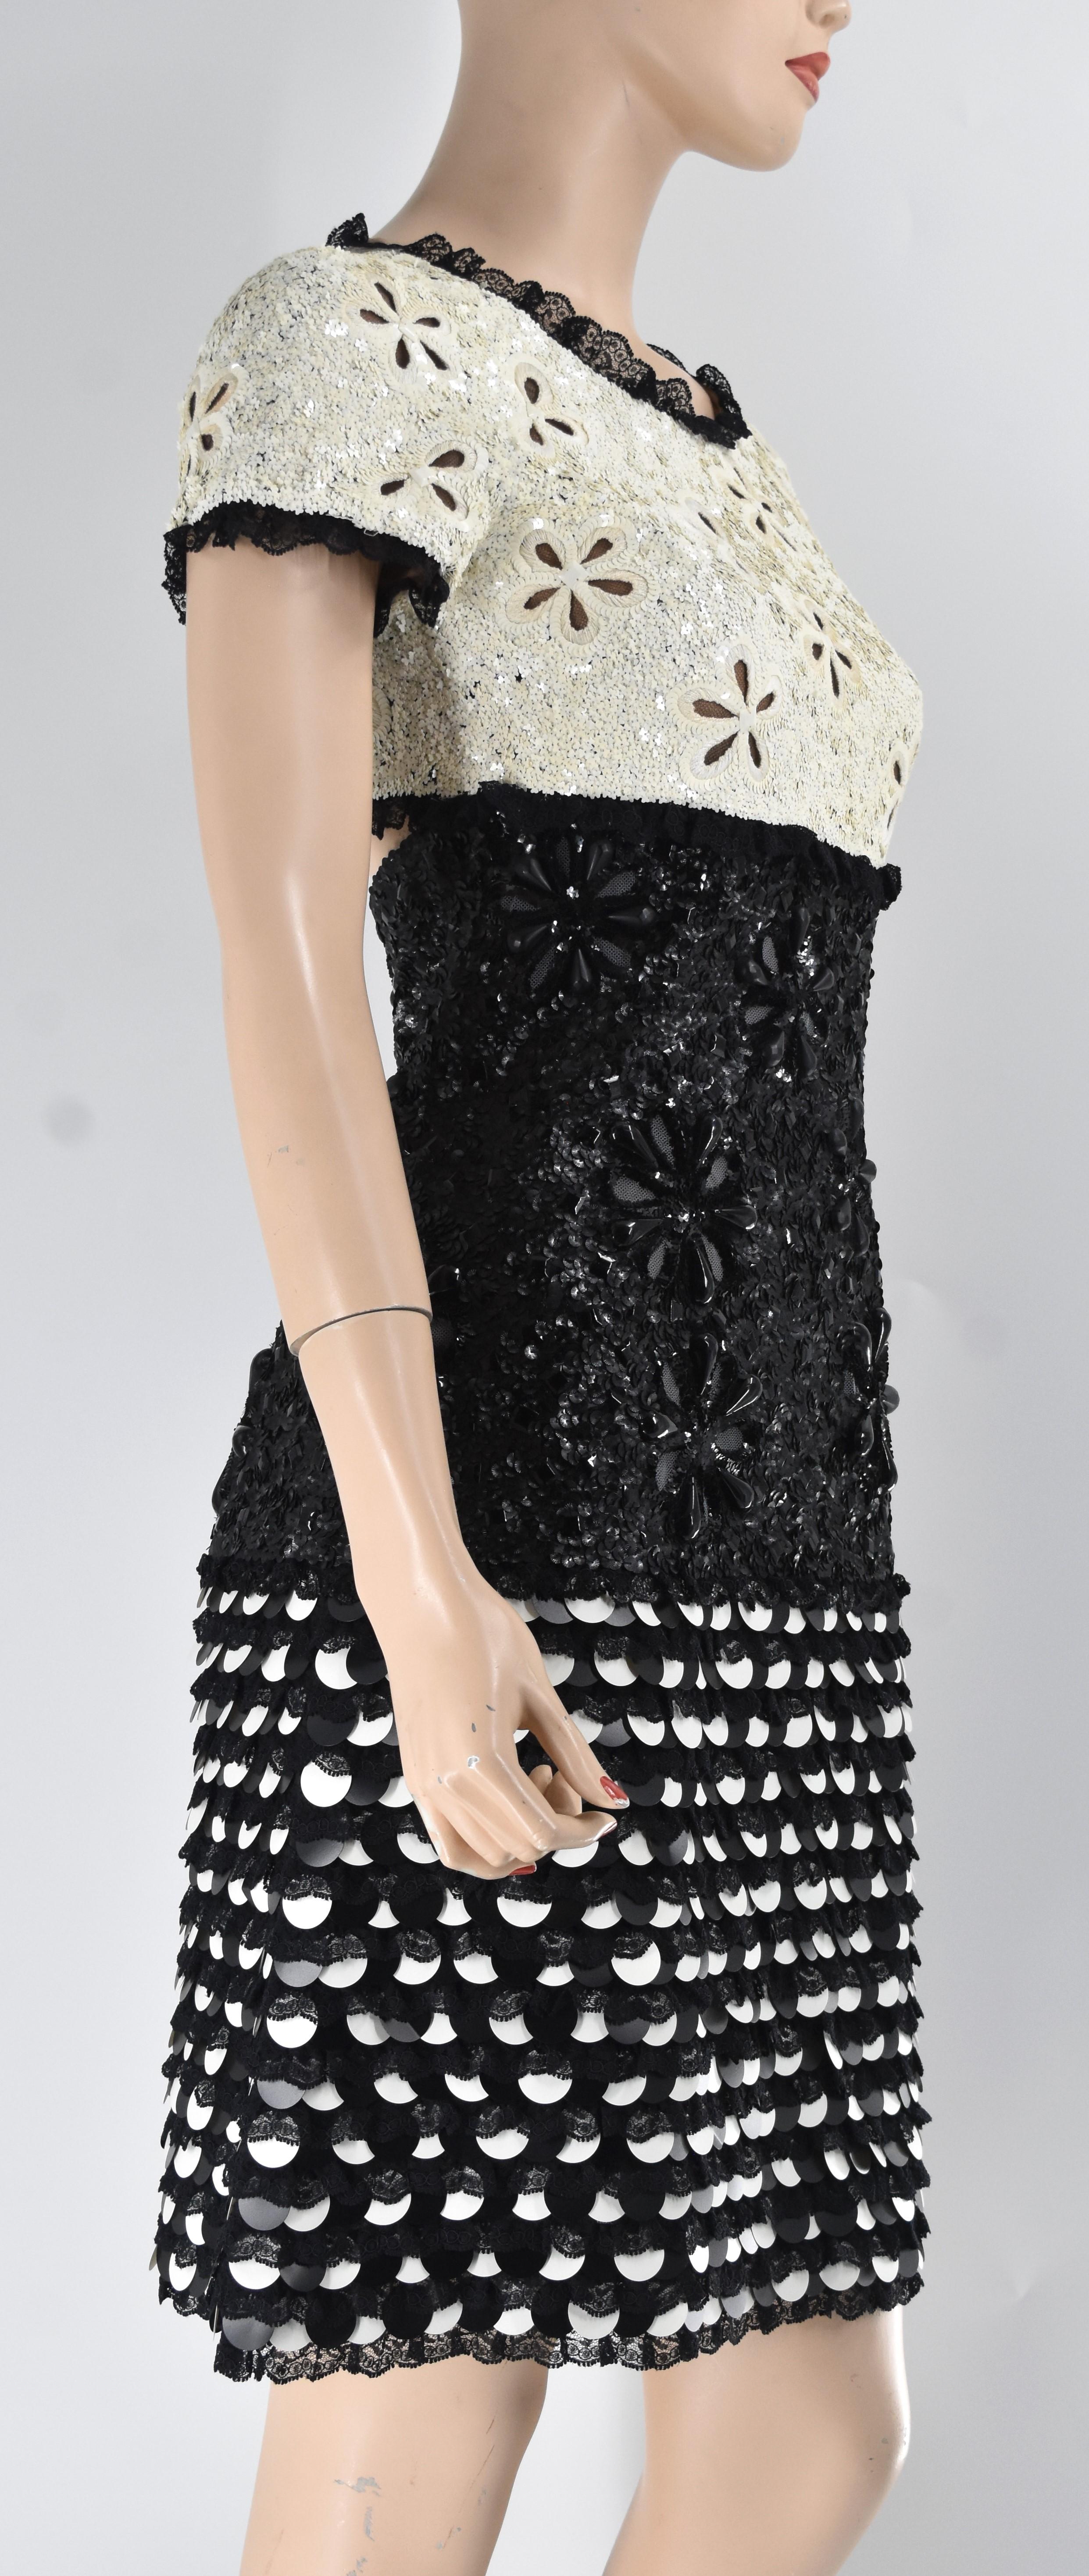 Chanel Cruise 2011 runway collection adorned with sequins throughout. This dress is new.